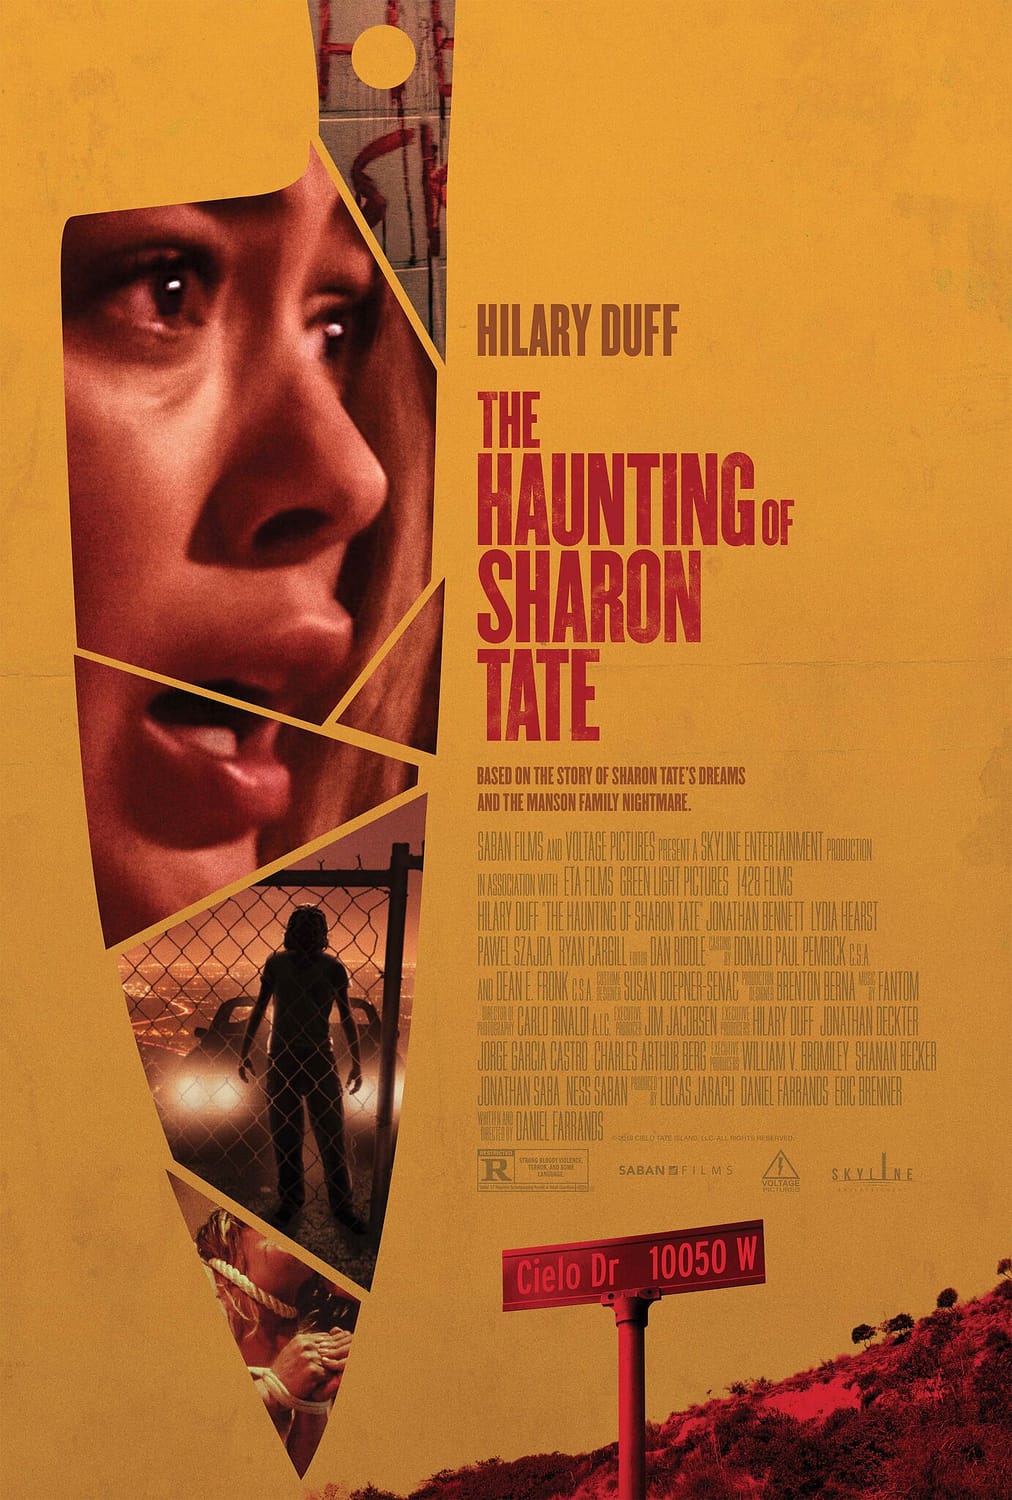 Pregnant with director Roman Polanski's child and awaiting his return from Europe, 26-year-old Hollywood actress Sharon Tate becomes plagued by visions of her imminent death.พากย์ไทย Soundtrack : Sub Thai